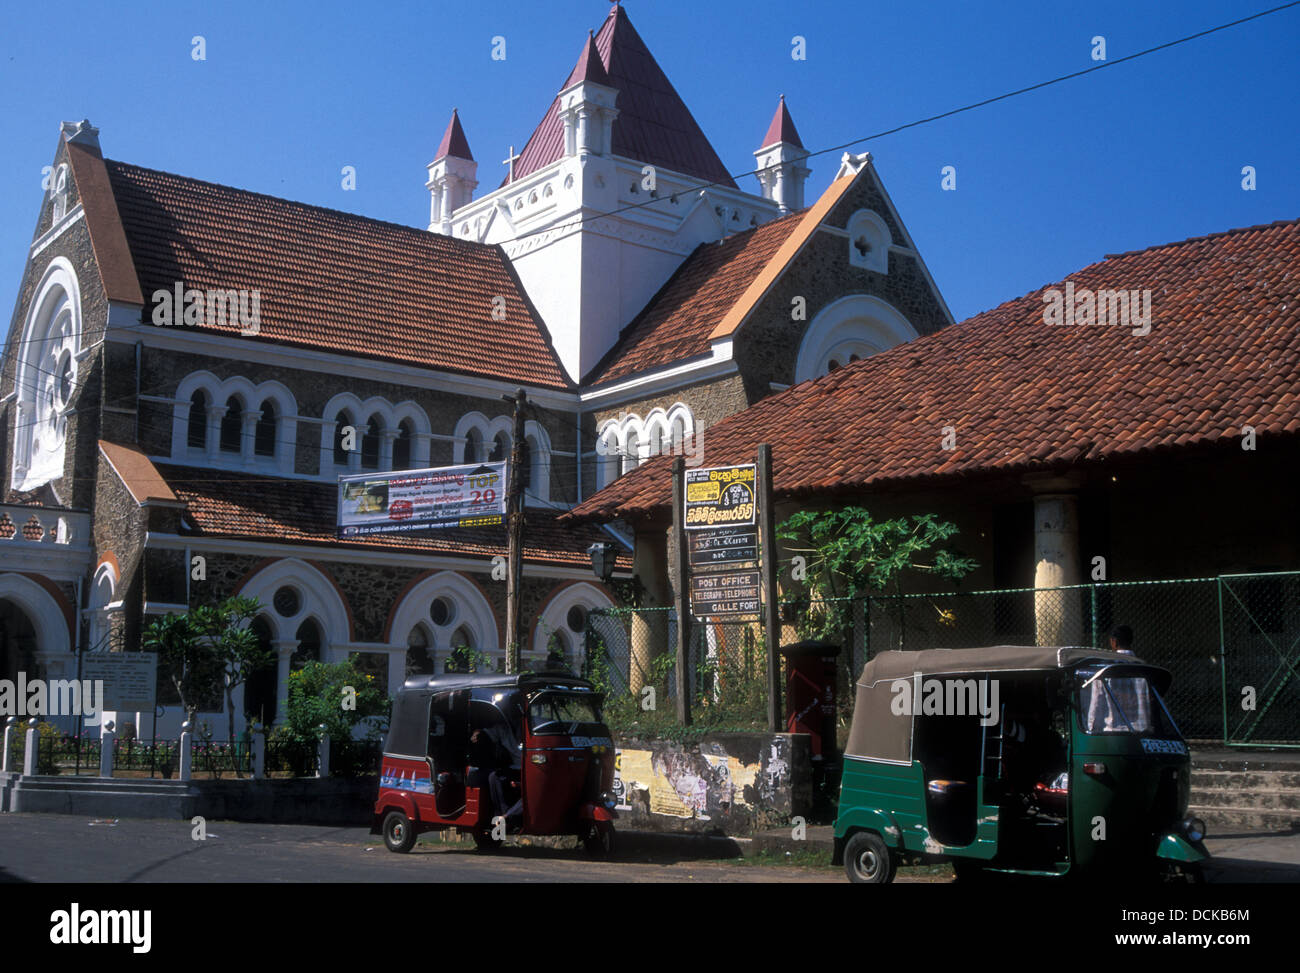 All Saints Church and Post Office inside Galle Fort, Sri Lanka Stock Photo